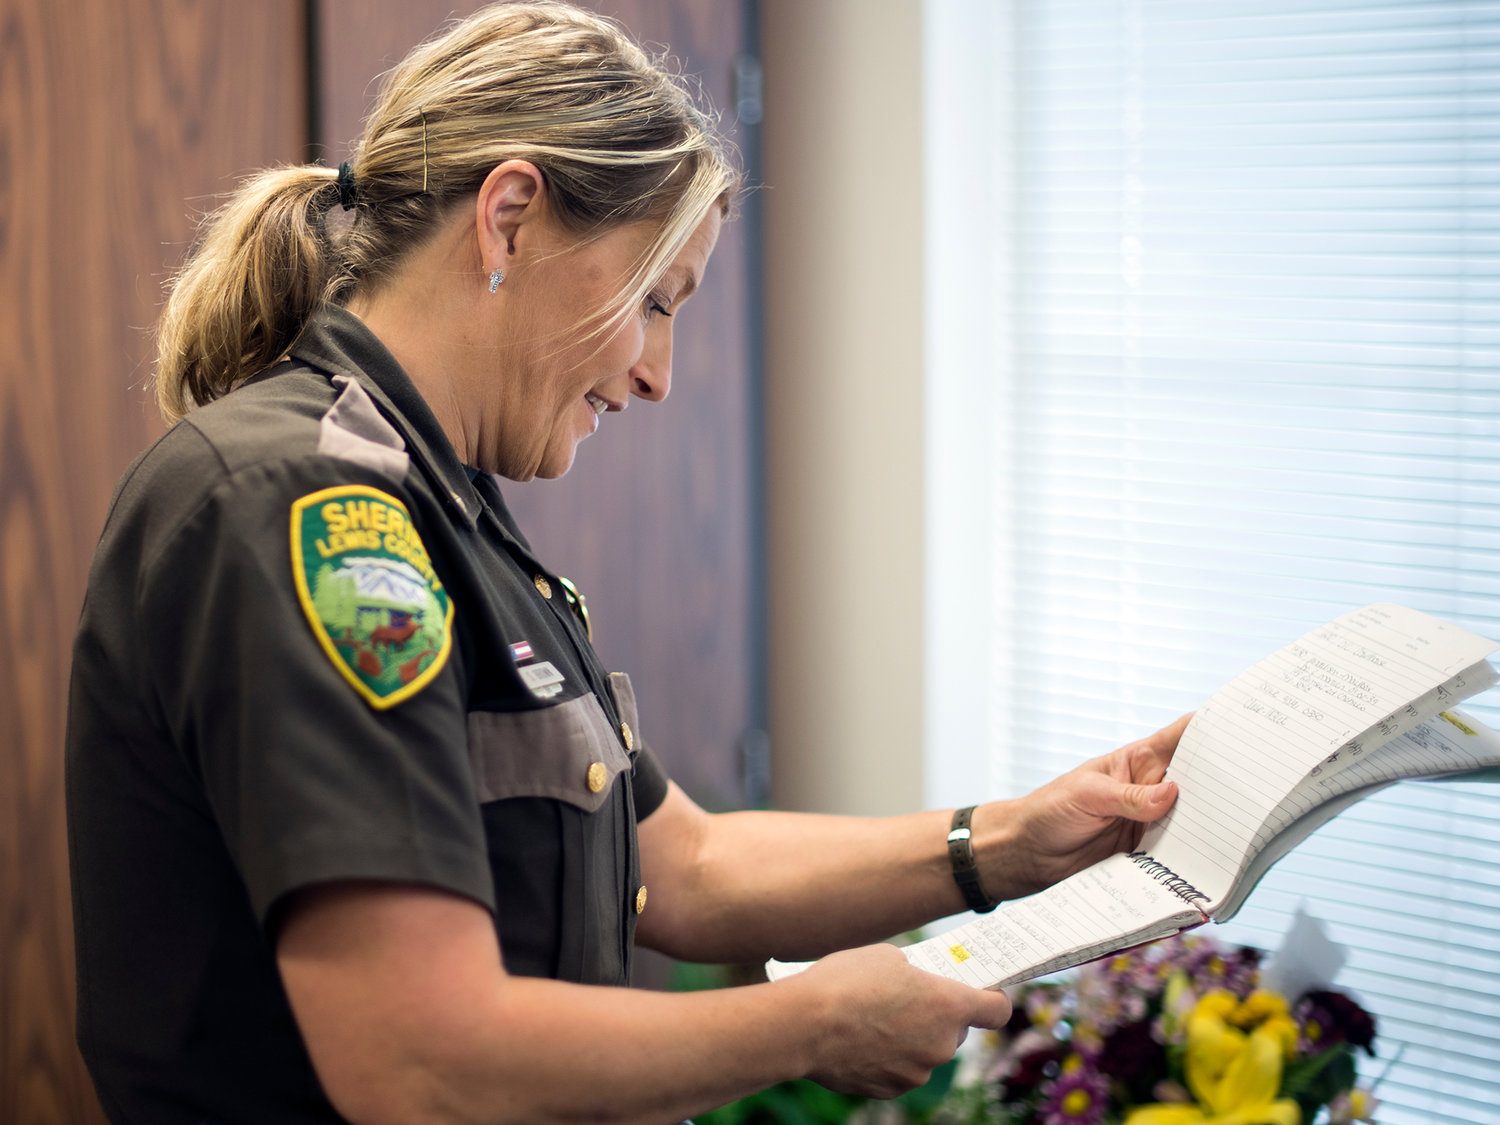 Chief Deputy Stacy Brown looks through her first log book from nearly 20 years ago when she started working at the Lewis County Sheriff's Office on Thursday in Chehalis.